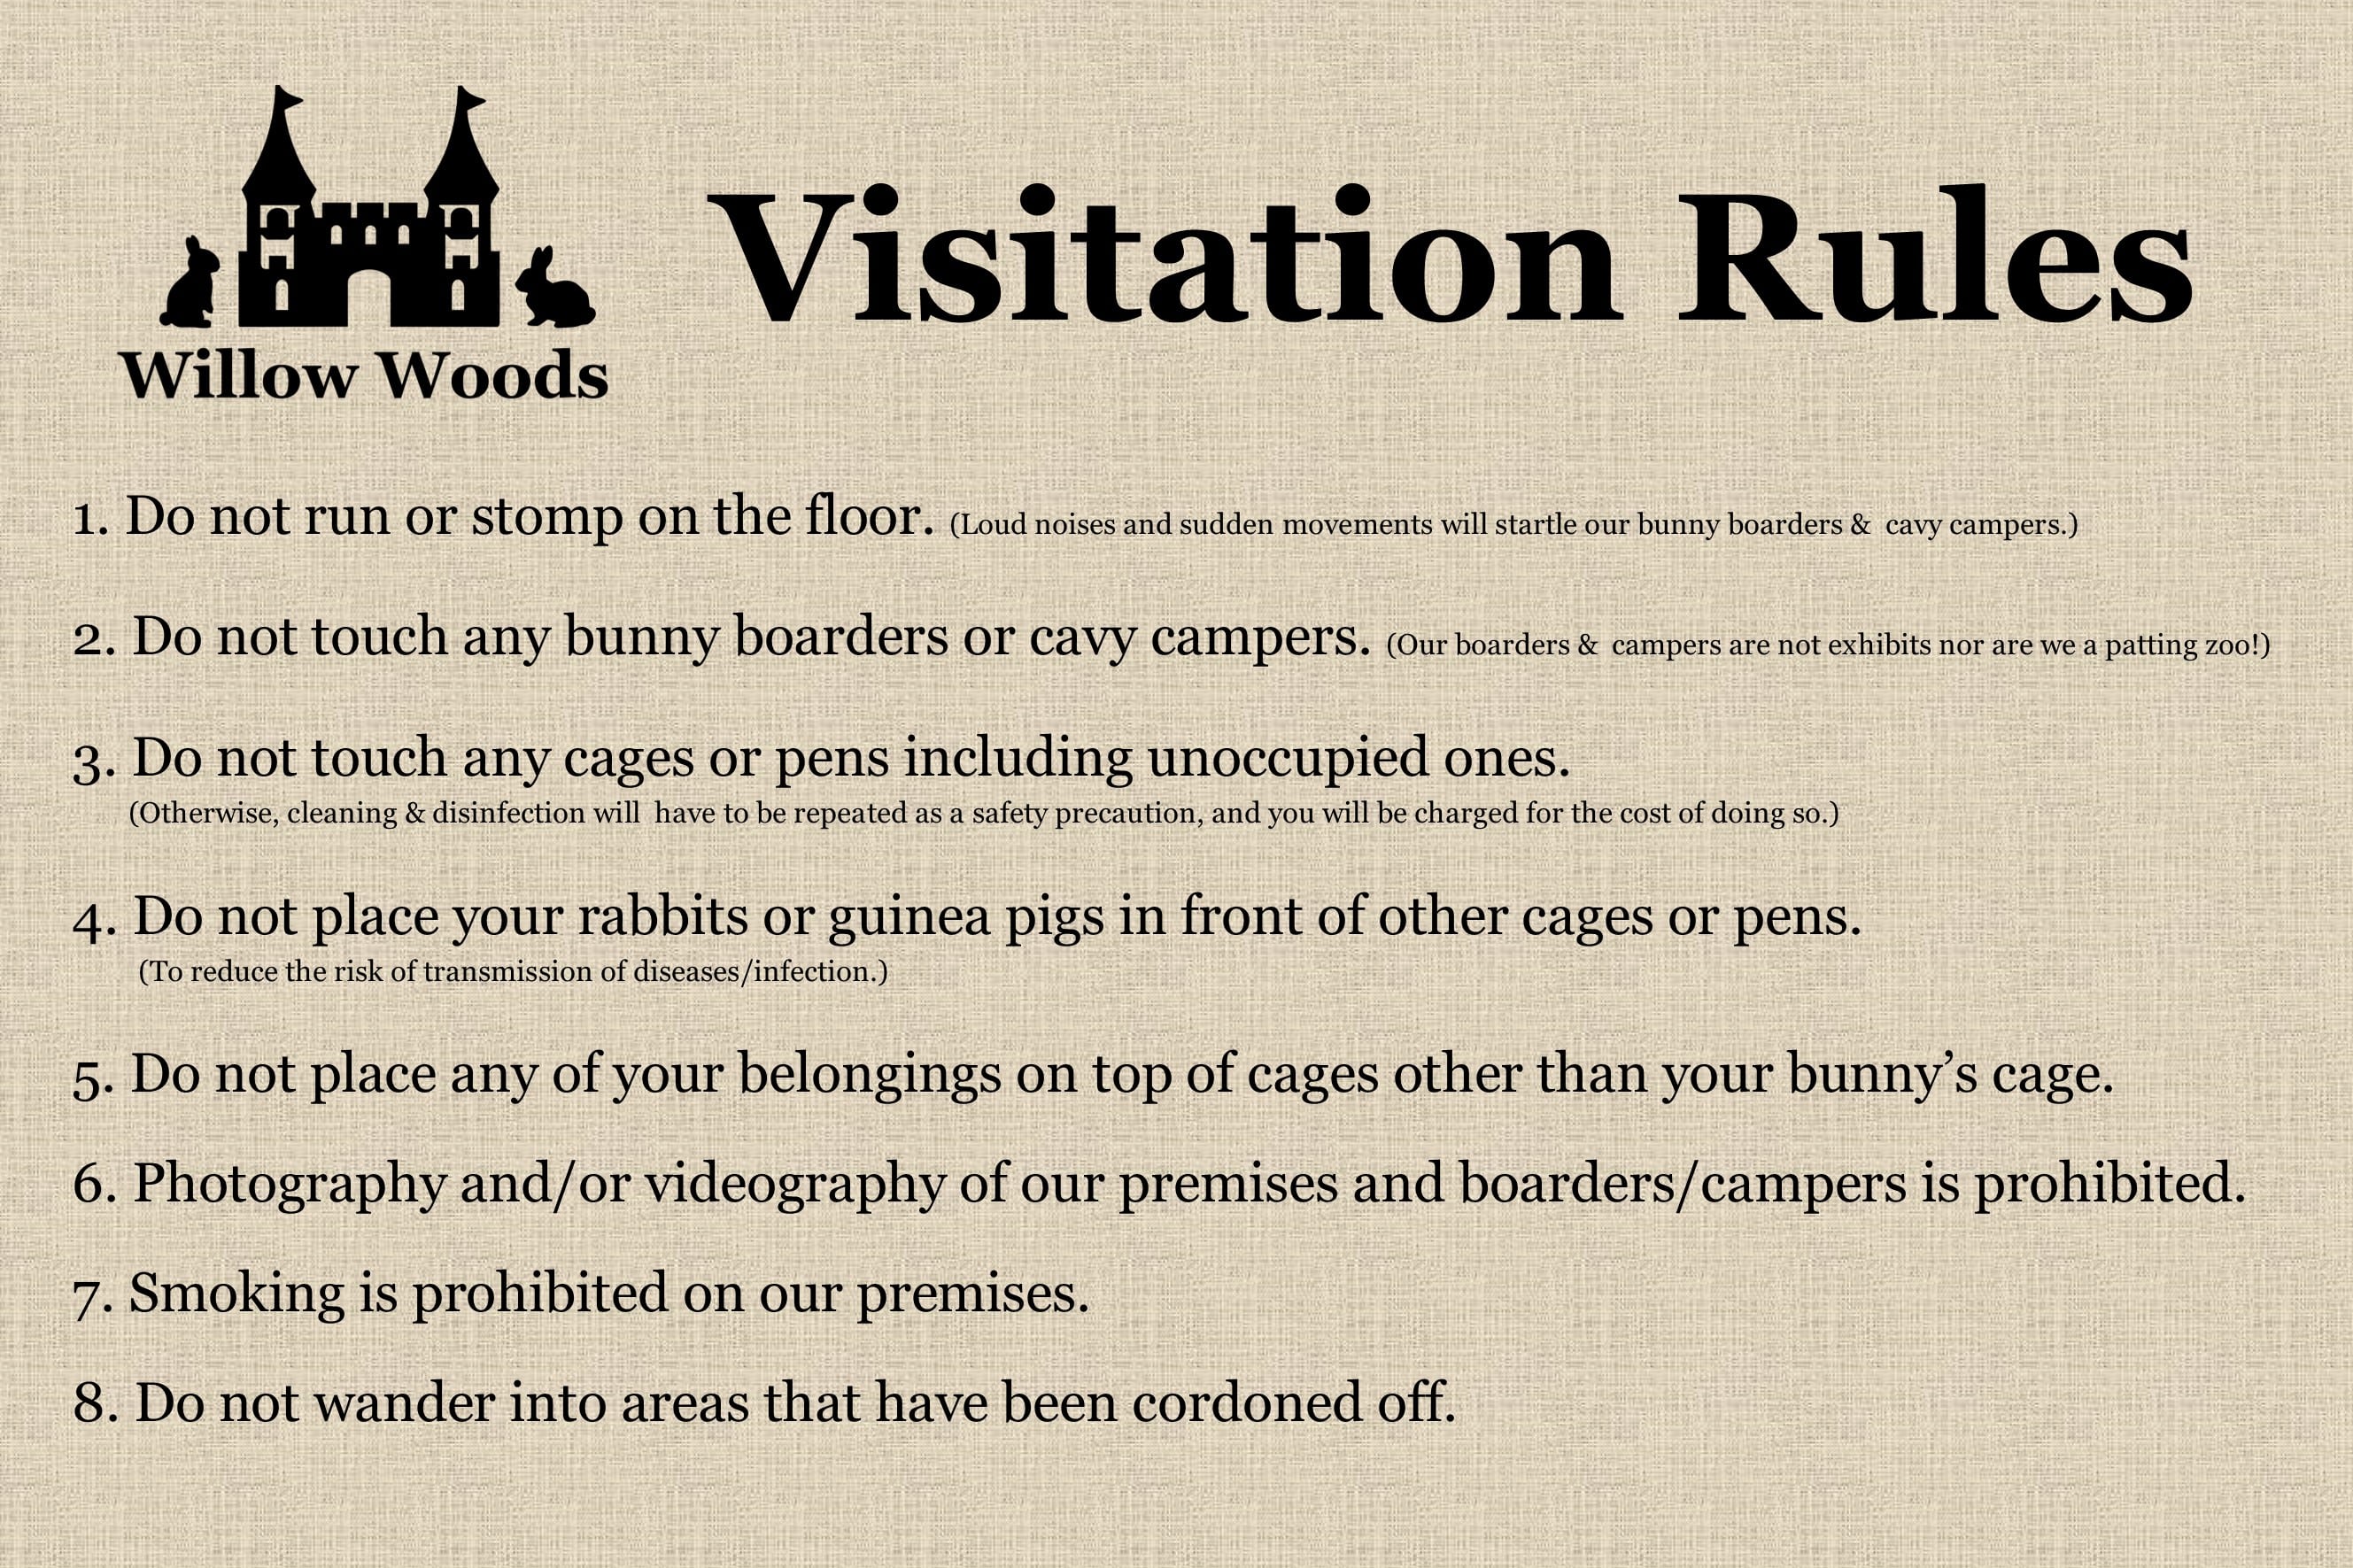 Visitation Rules for tours at Willow Woods, our Rabbit & Guinea Pig Hotel in Melbourne